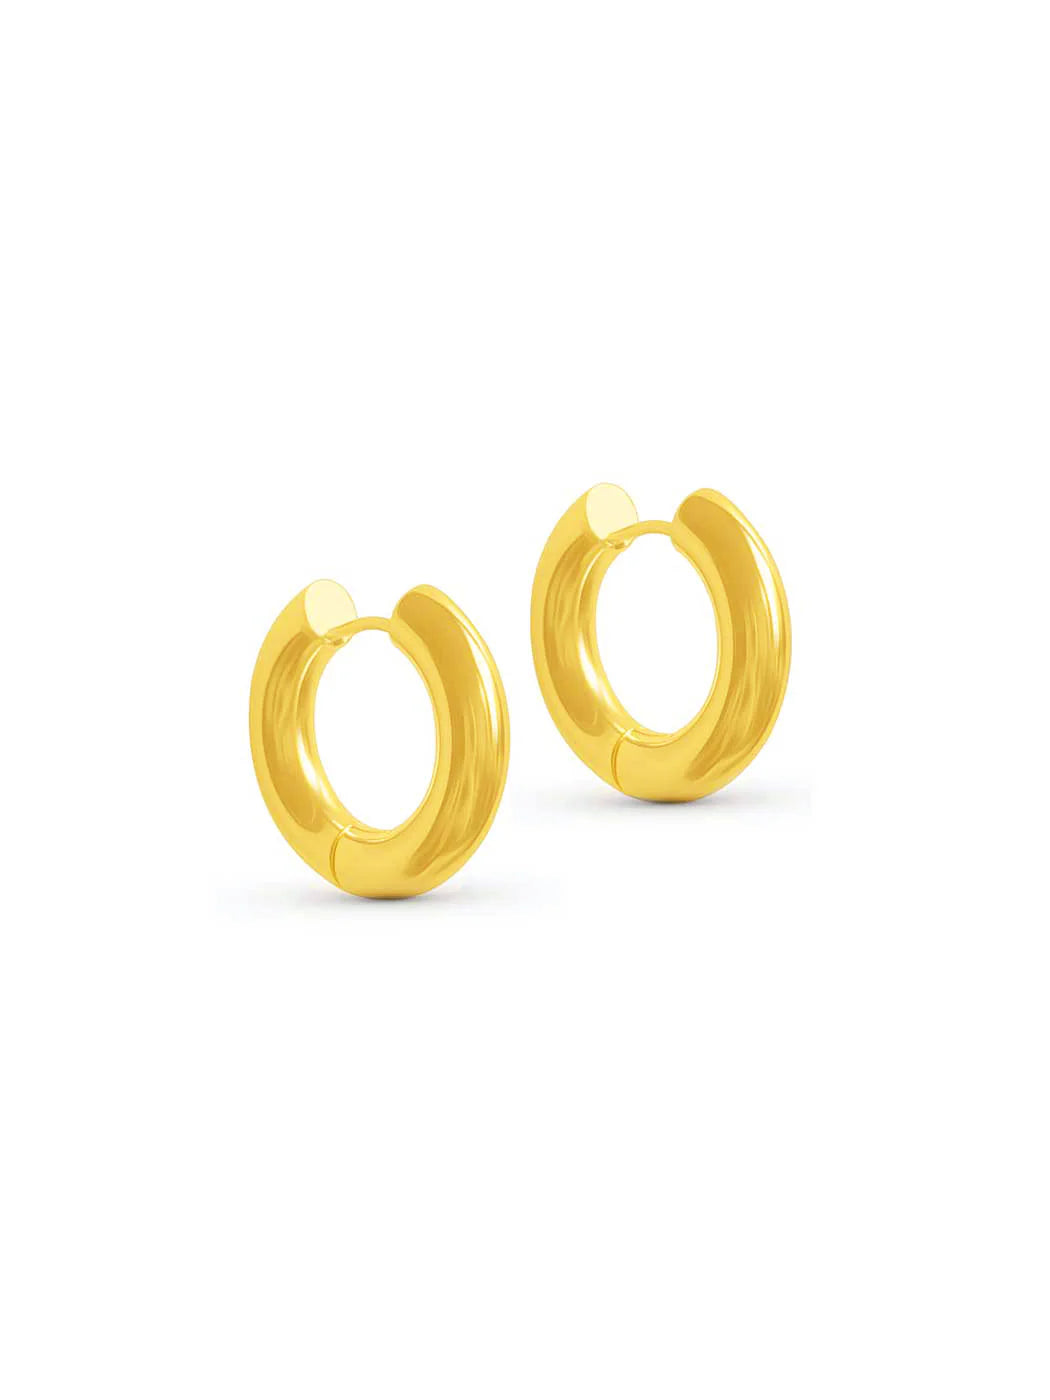 Harlow Chubby Hoops - Gold Plating